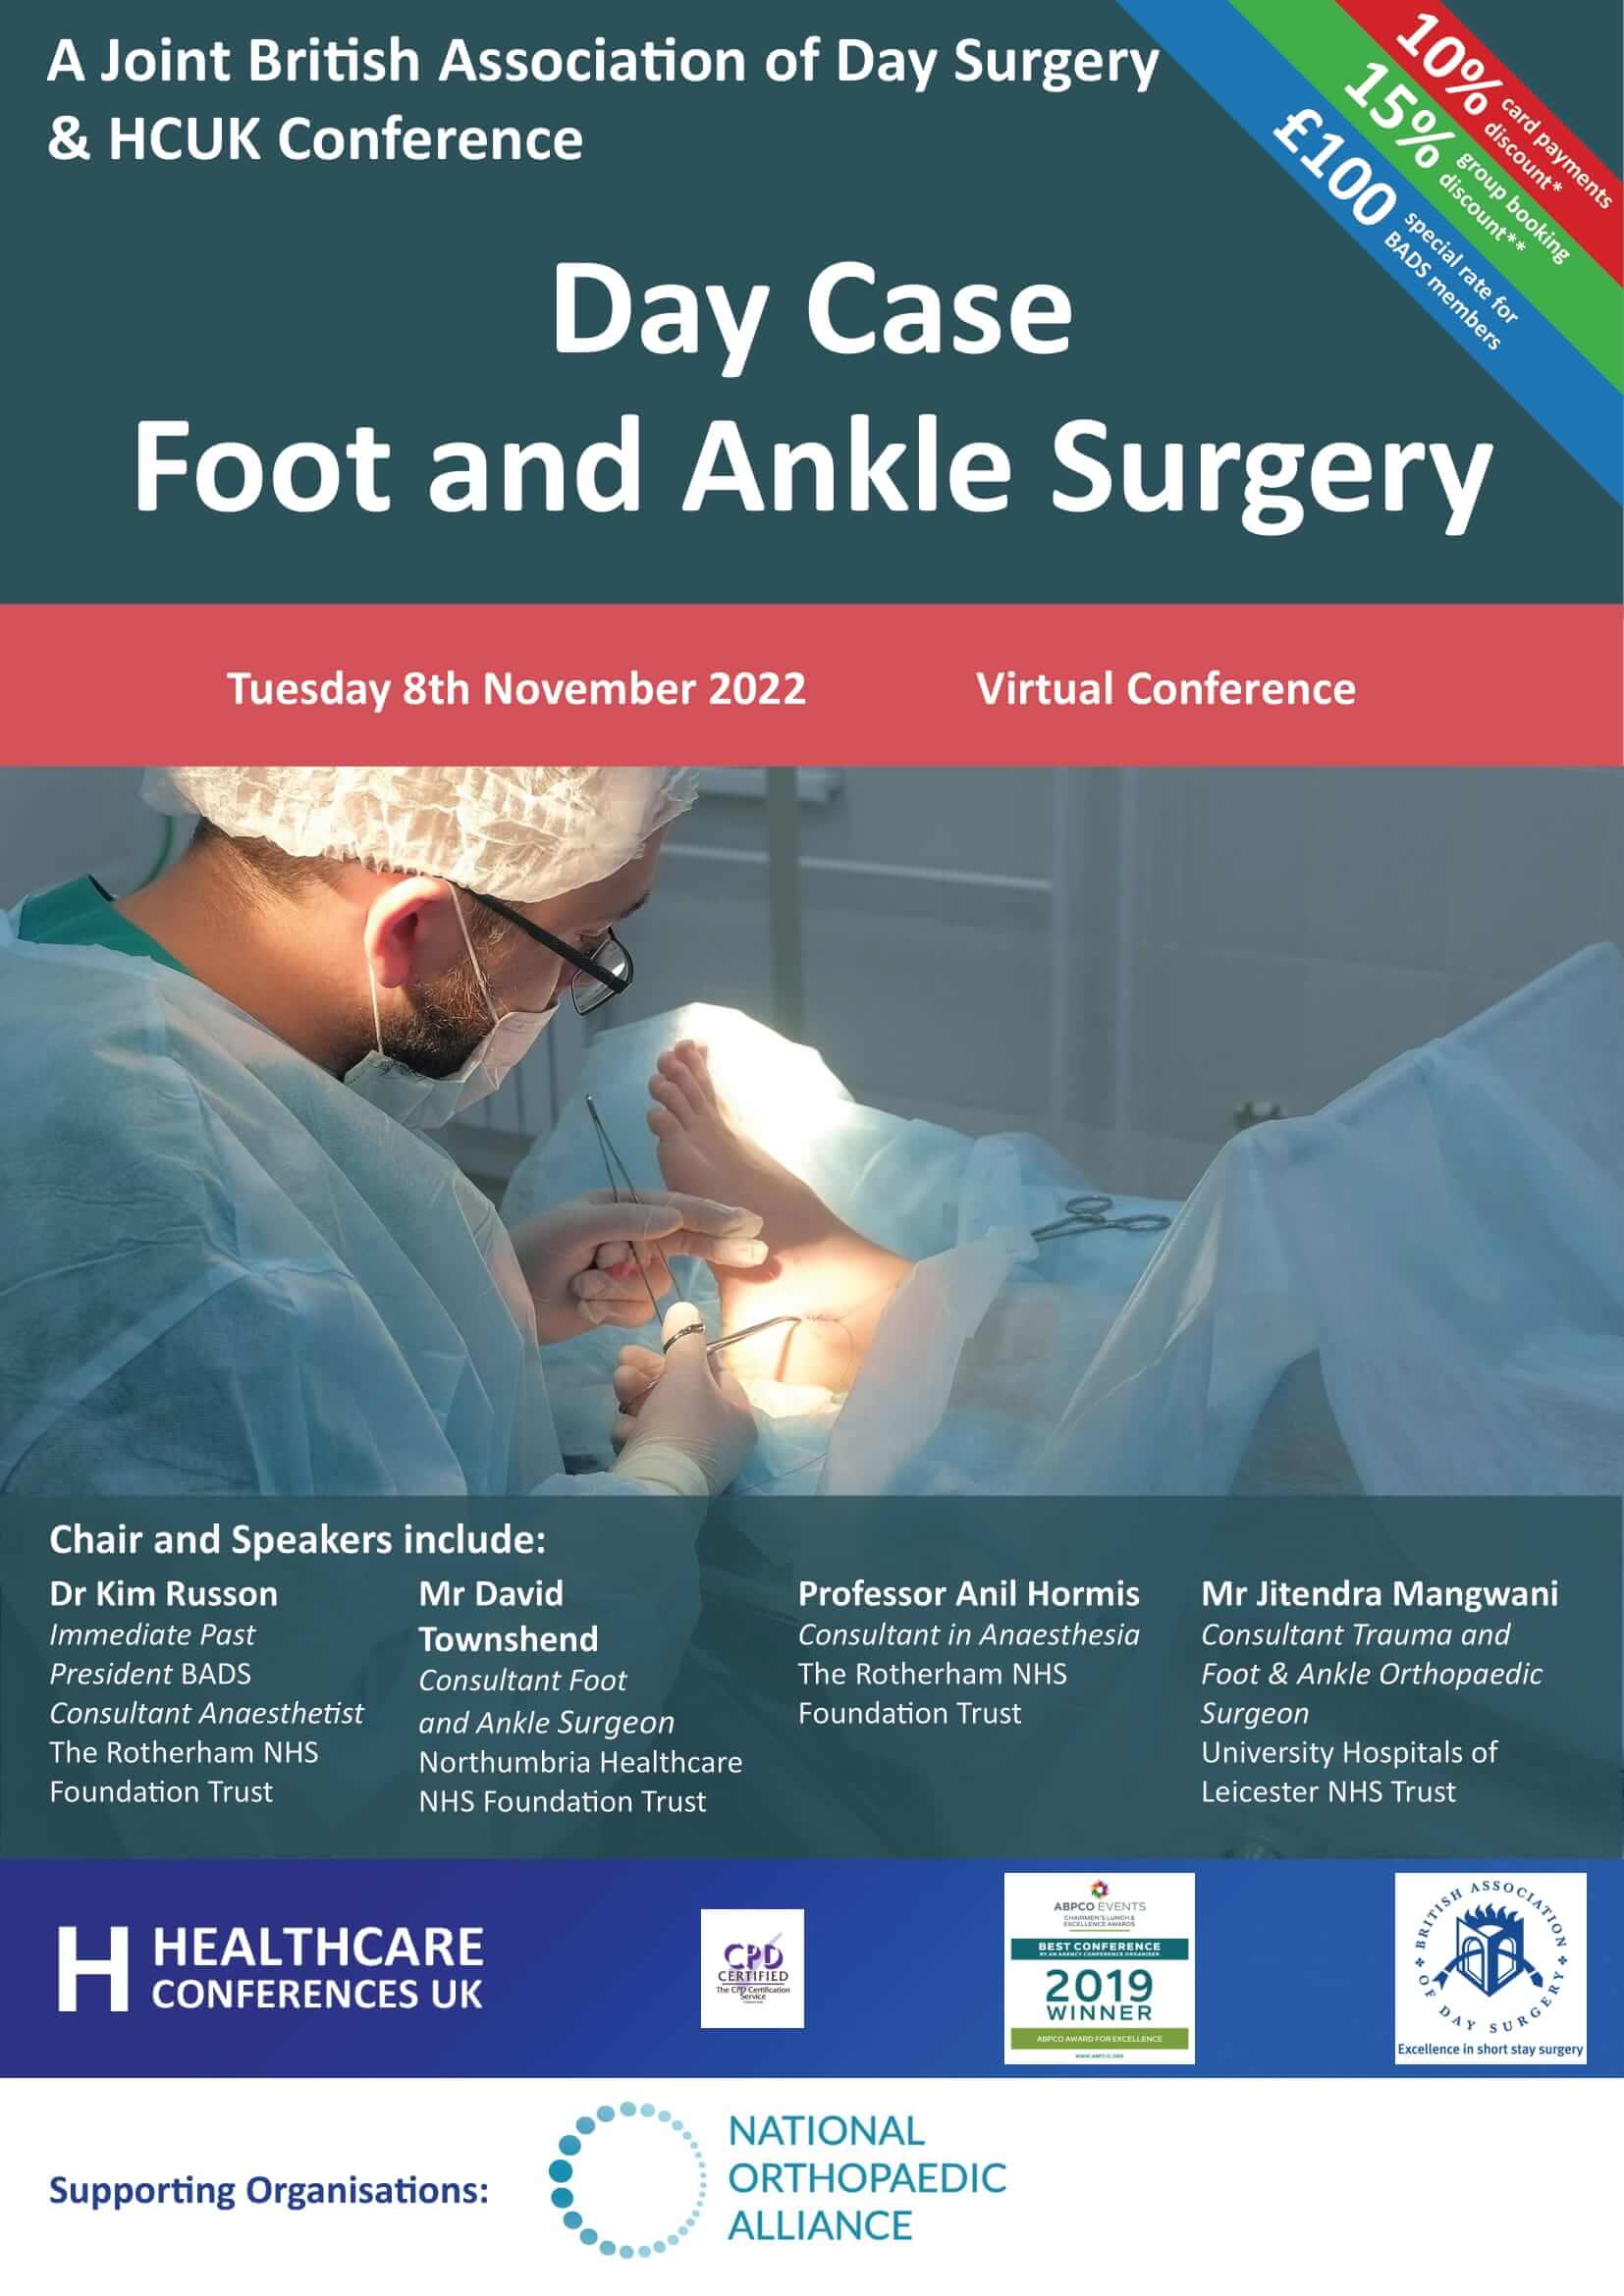 Day Case Foot and Ankle Surgery